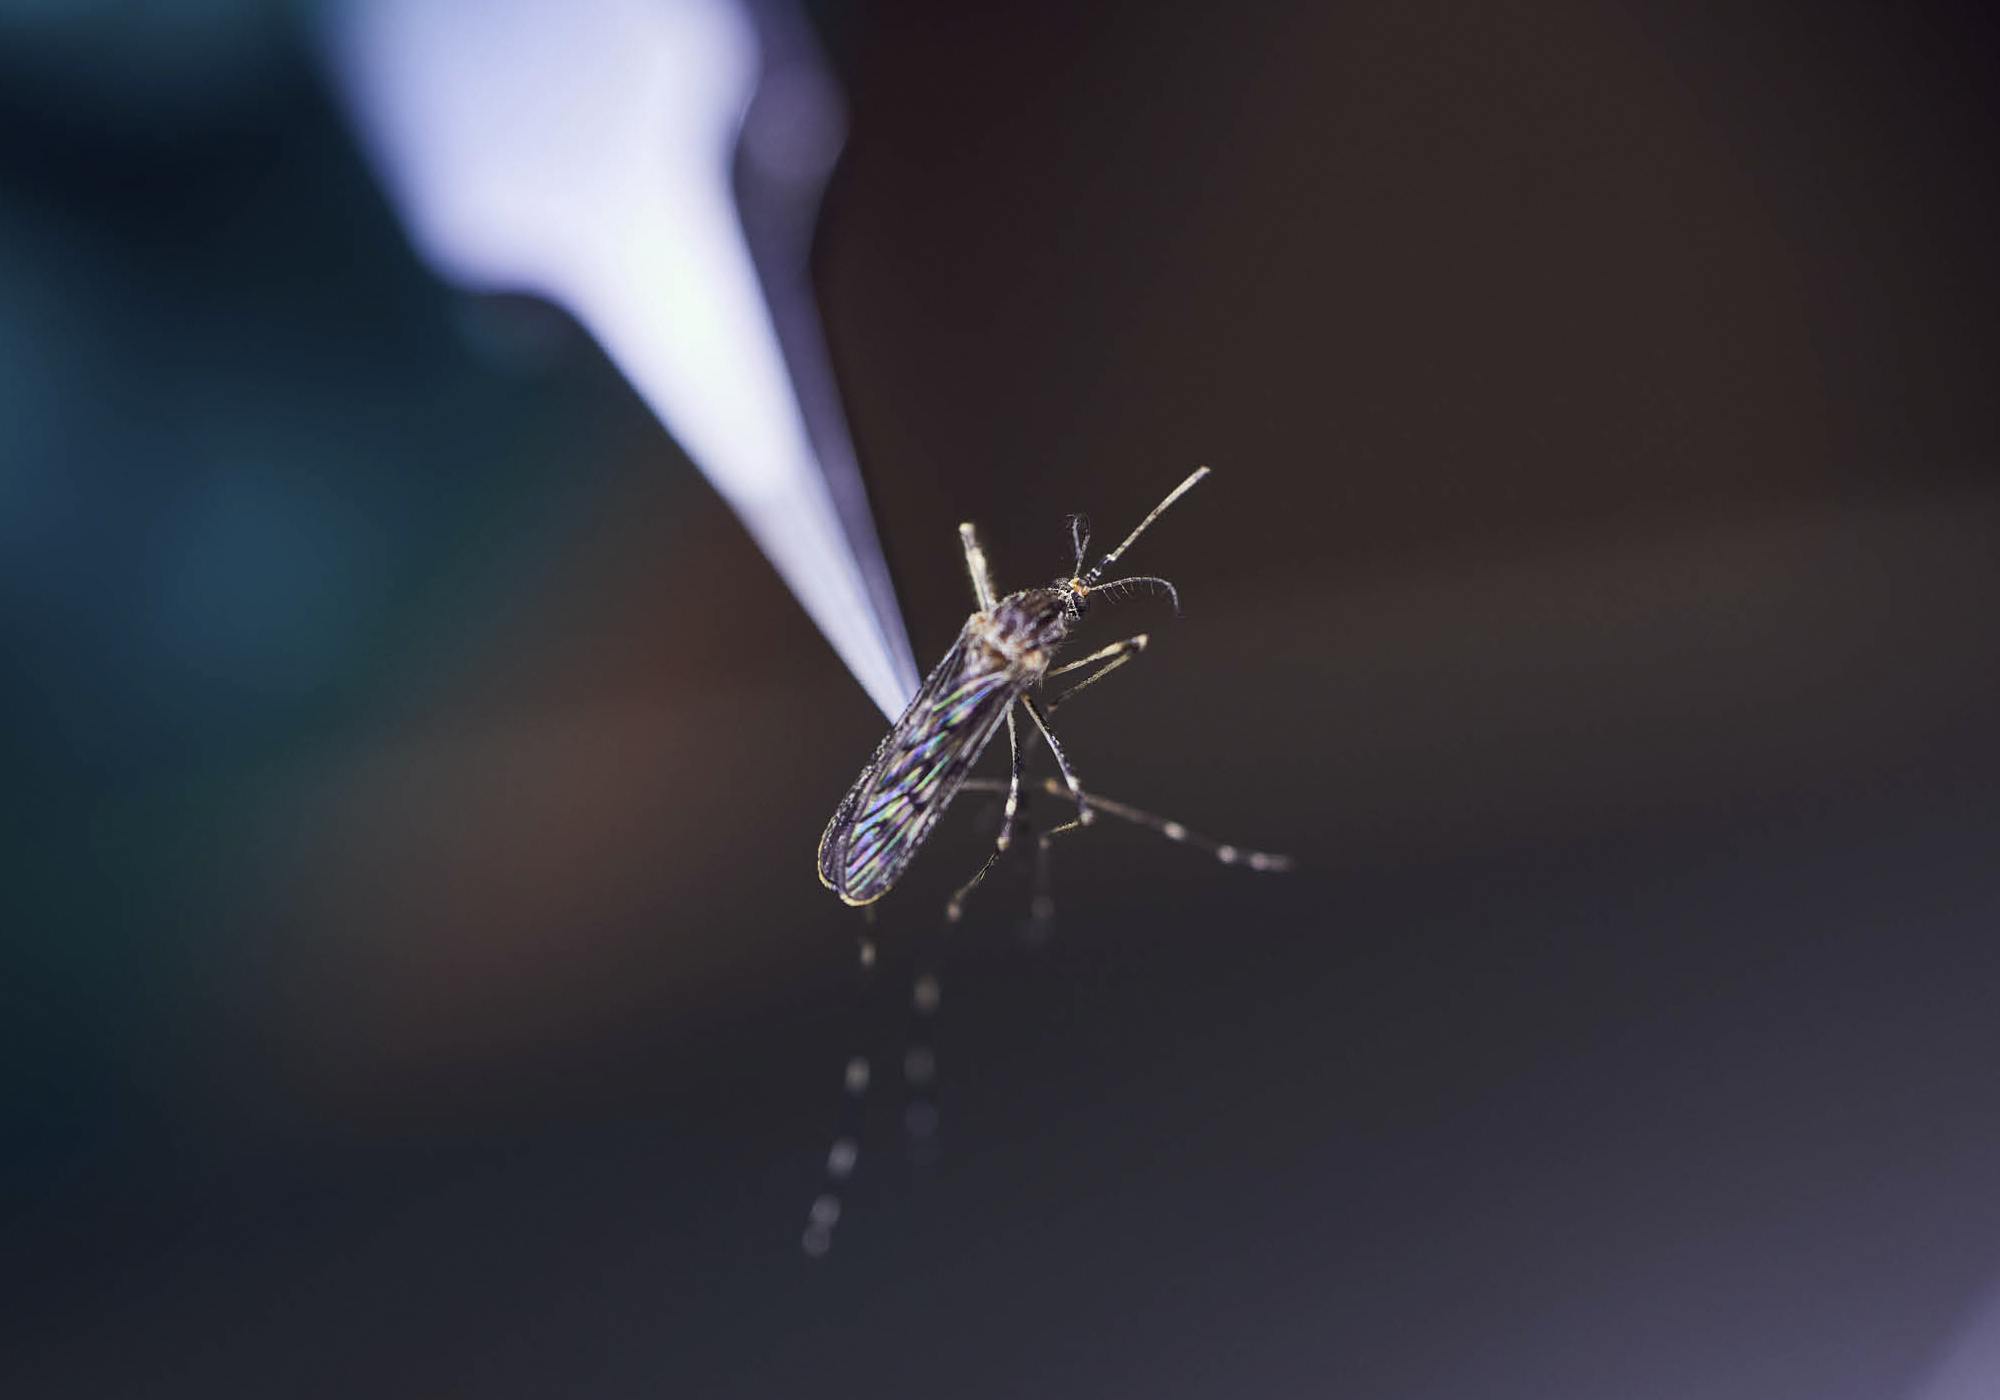 Can a bold new plan to stop mosquitoes catch on?